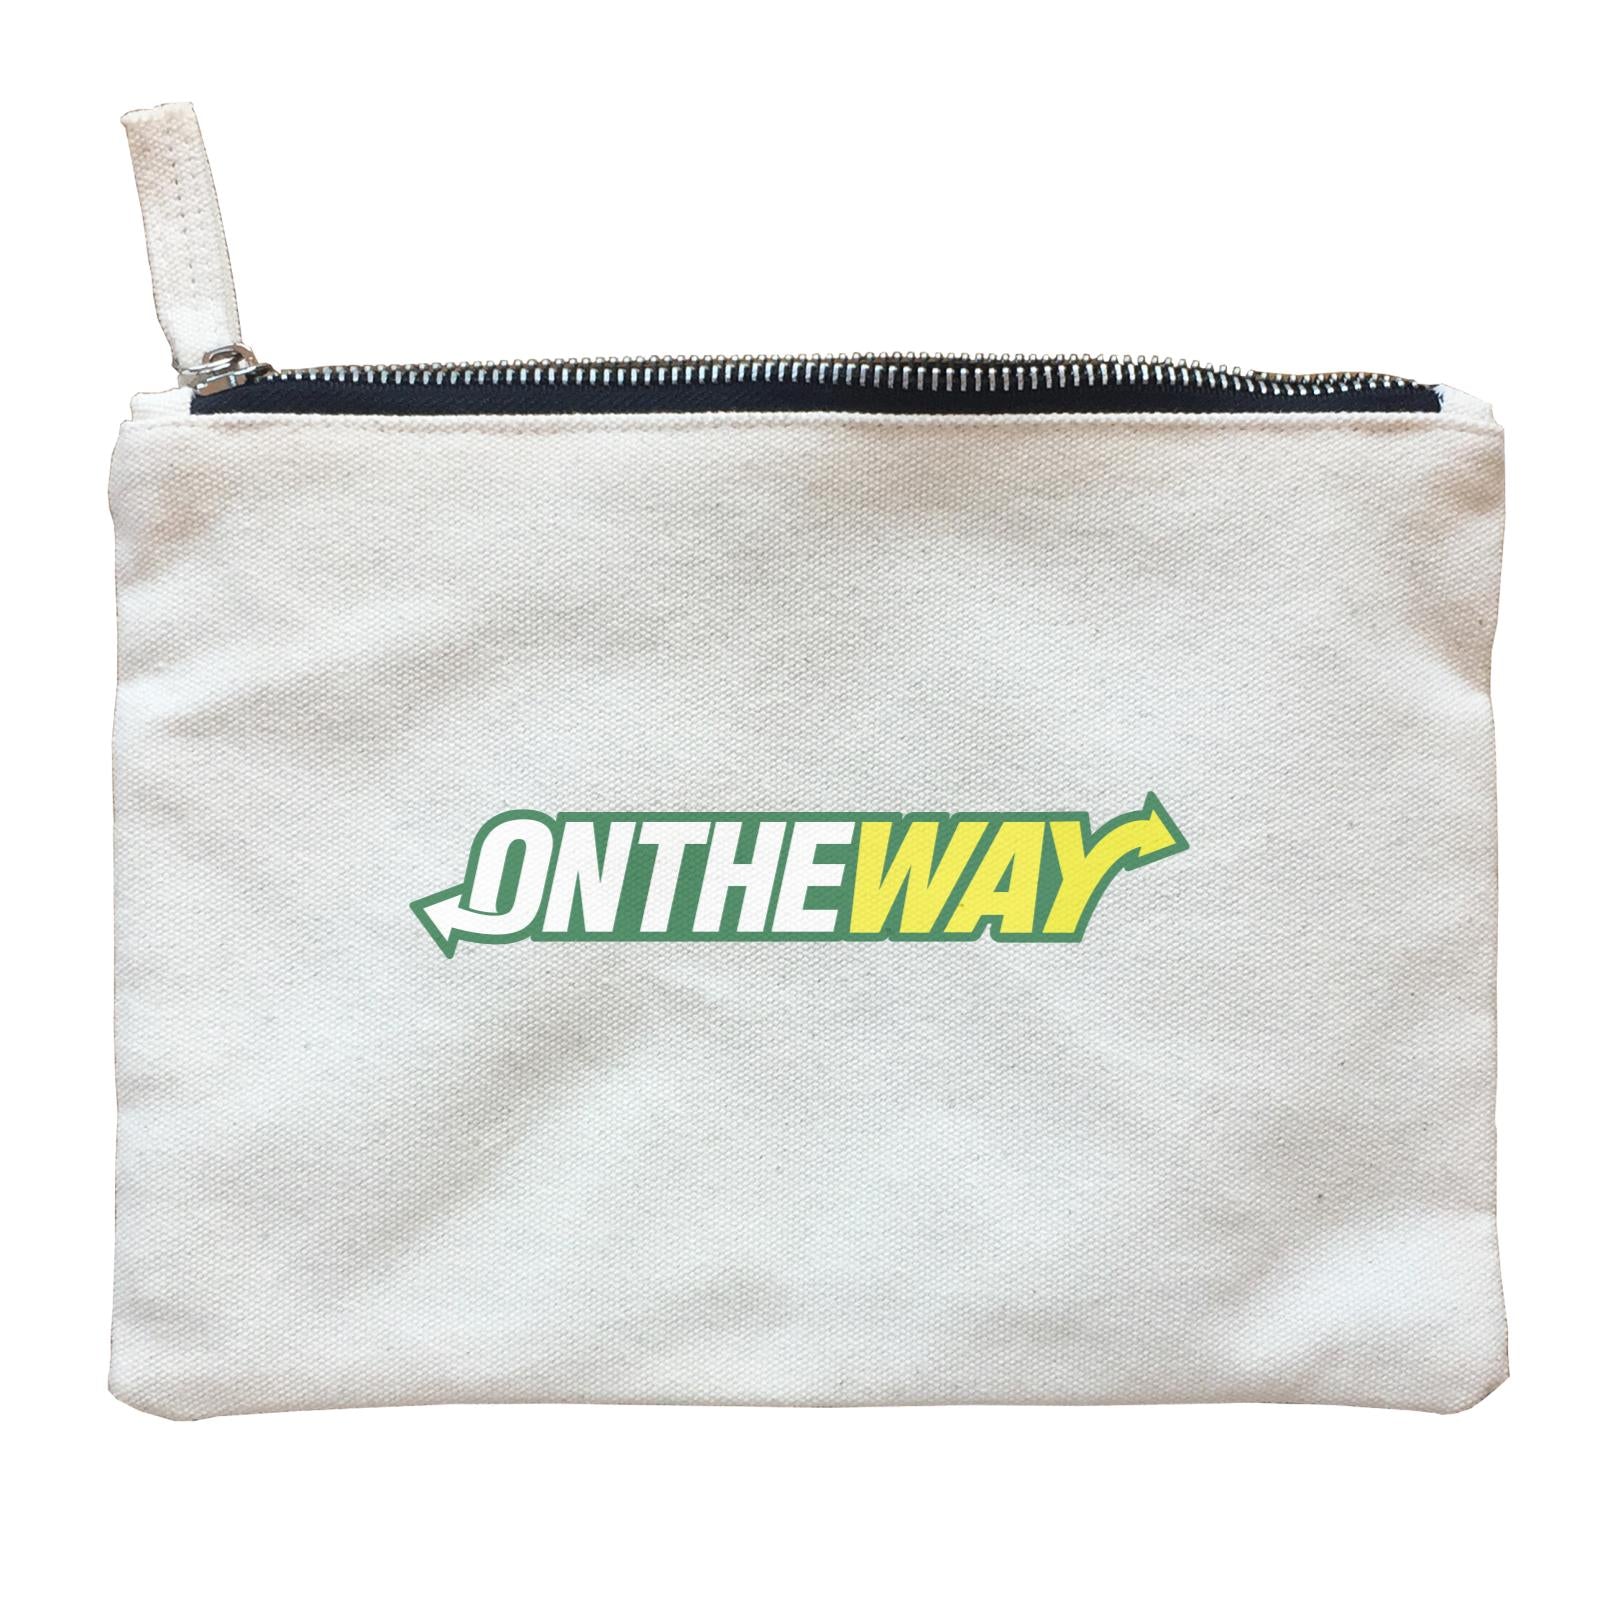 Slang Statement On The Way Accessories Zipper Pouch